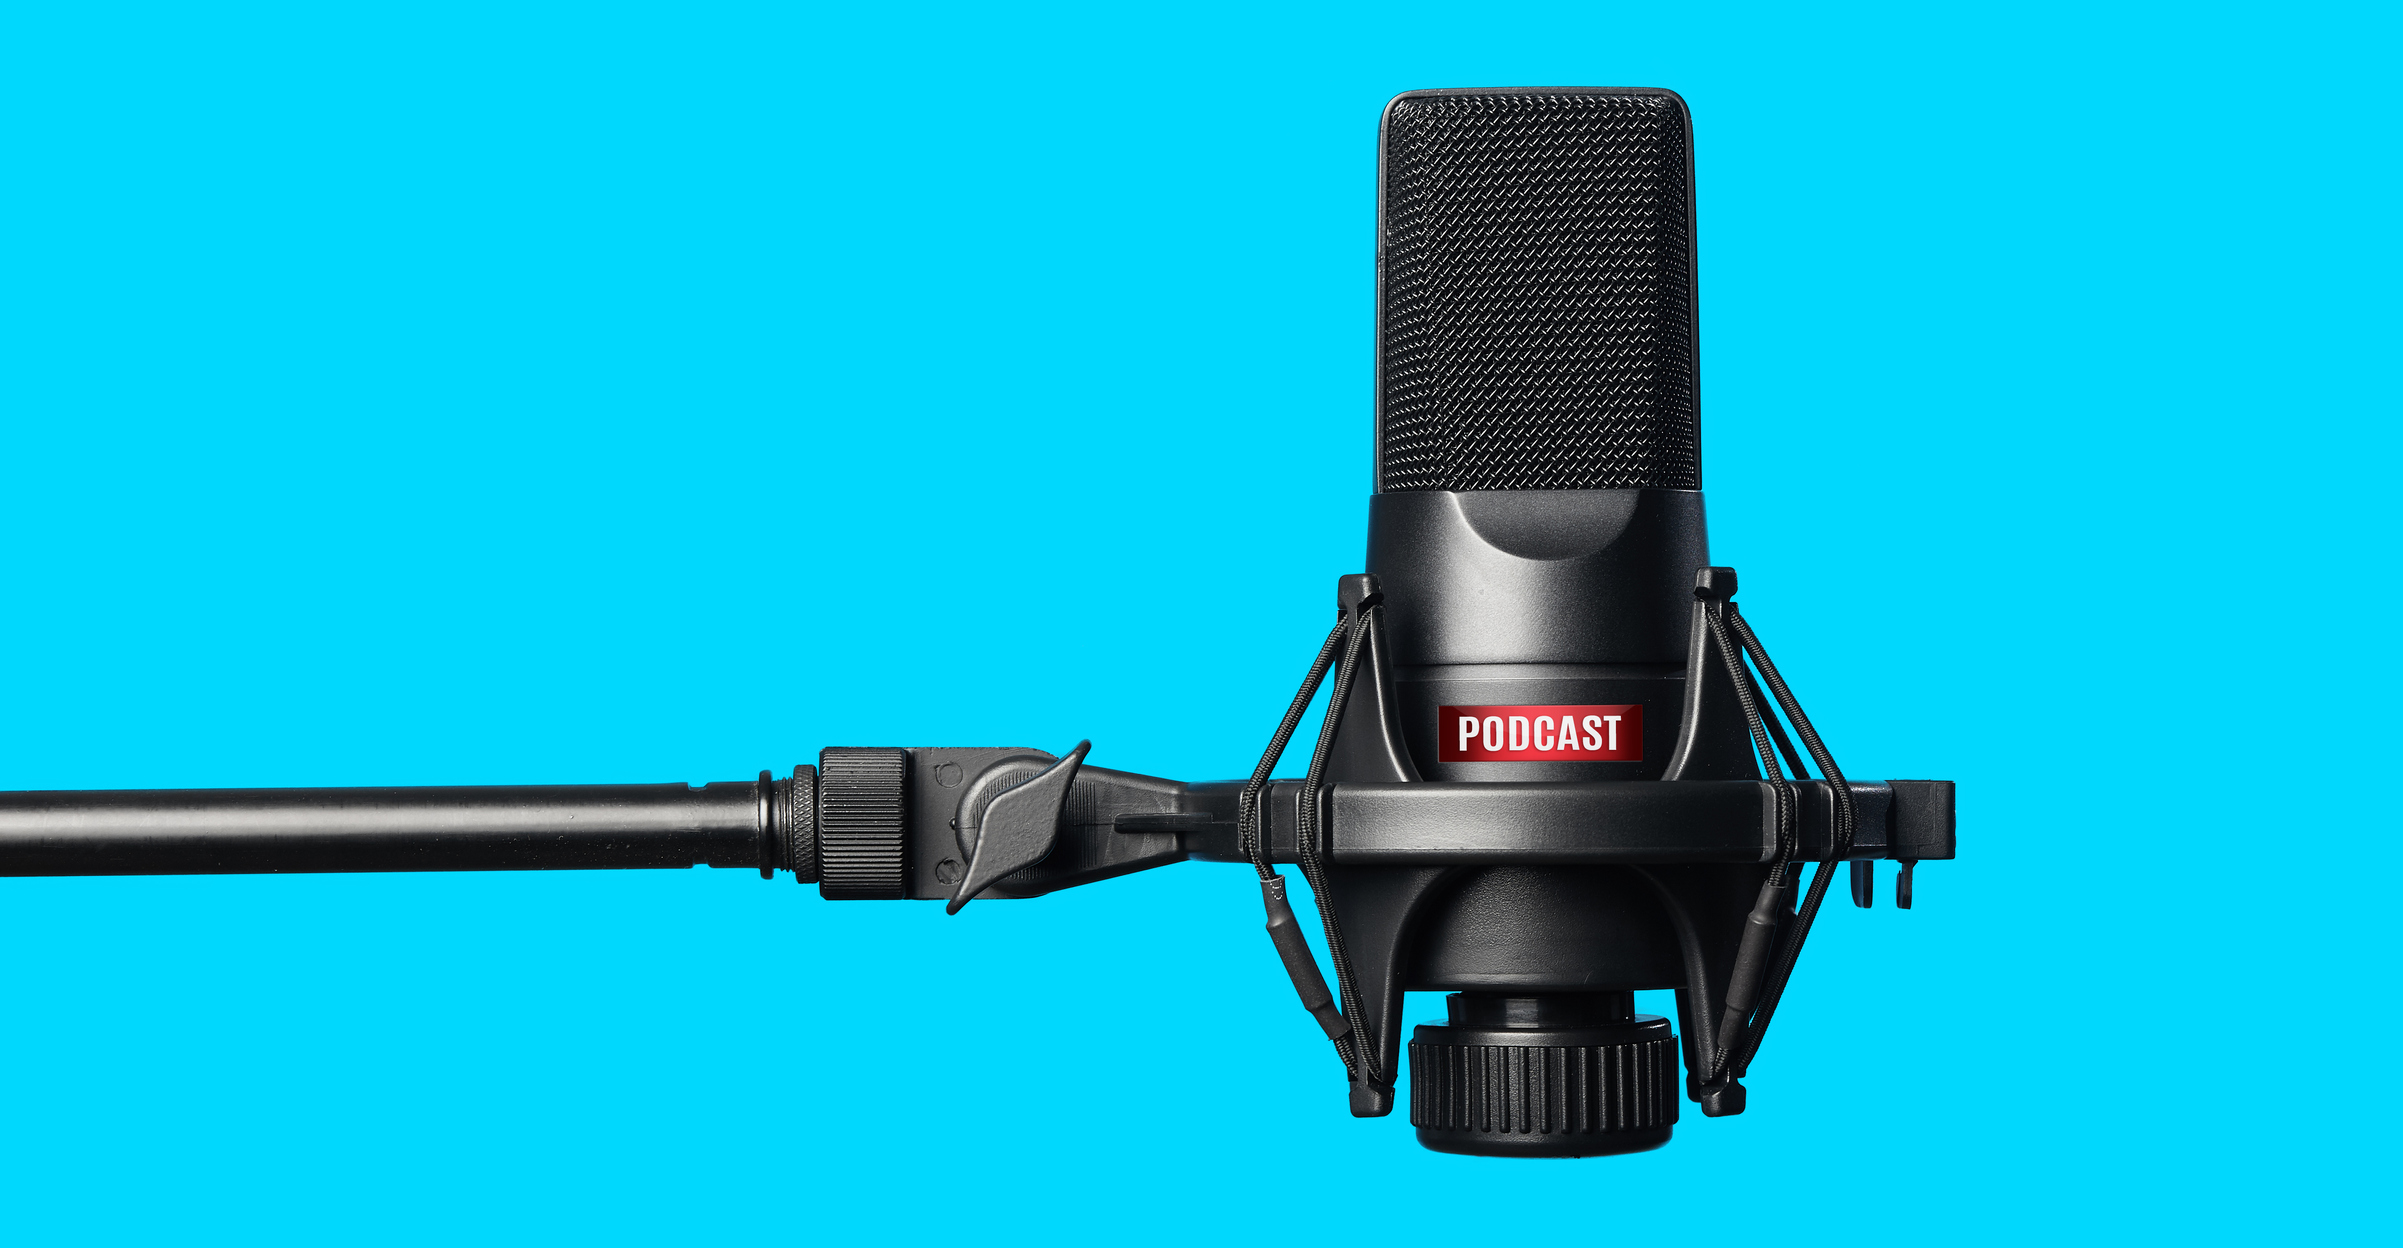 21 Resources to Find a Great Podcast Guest